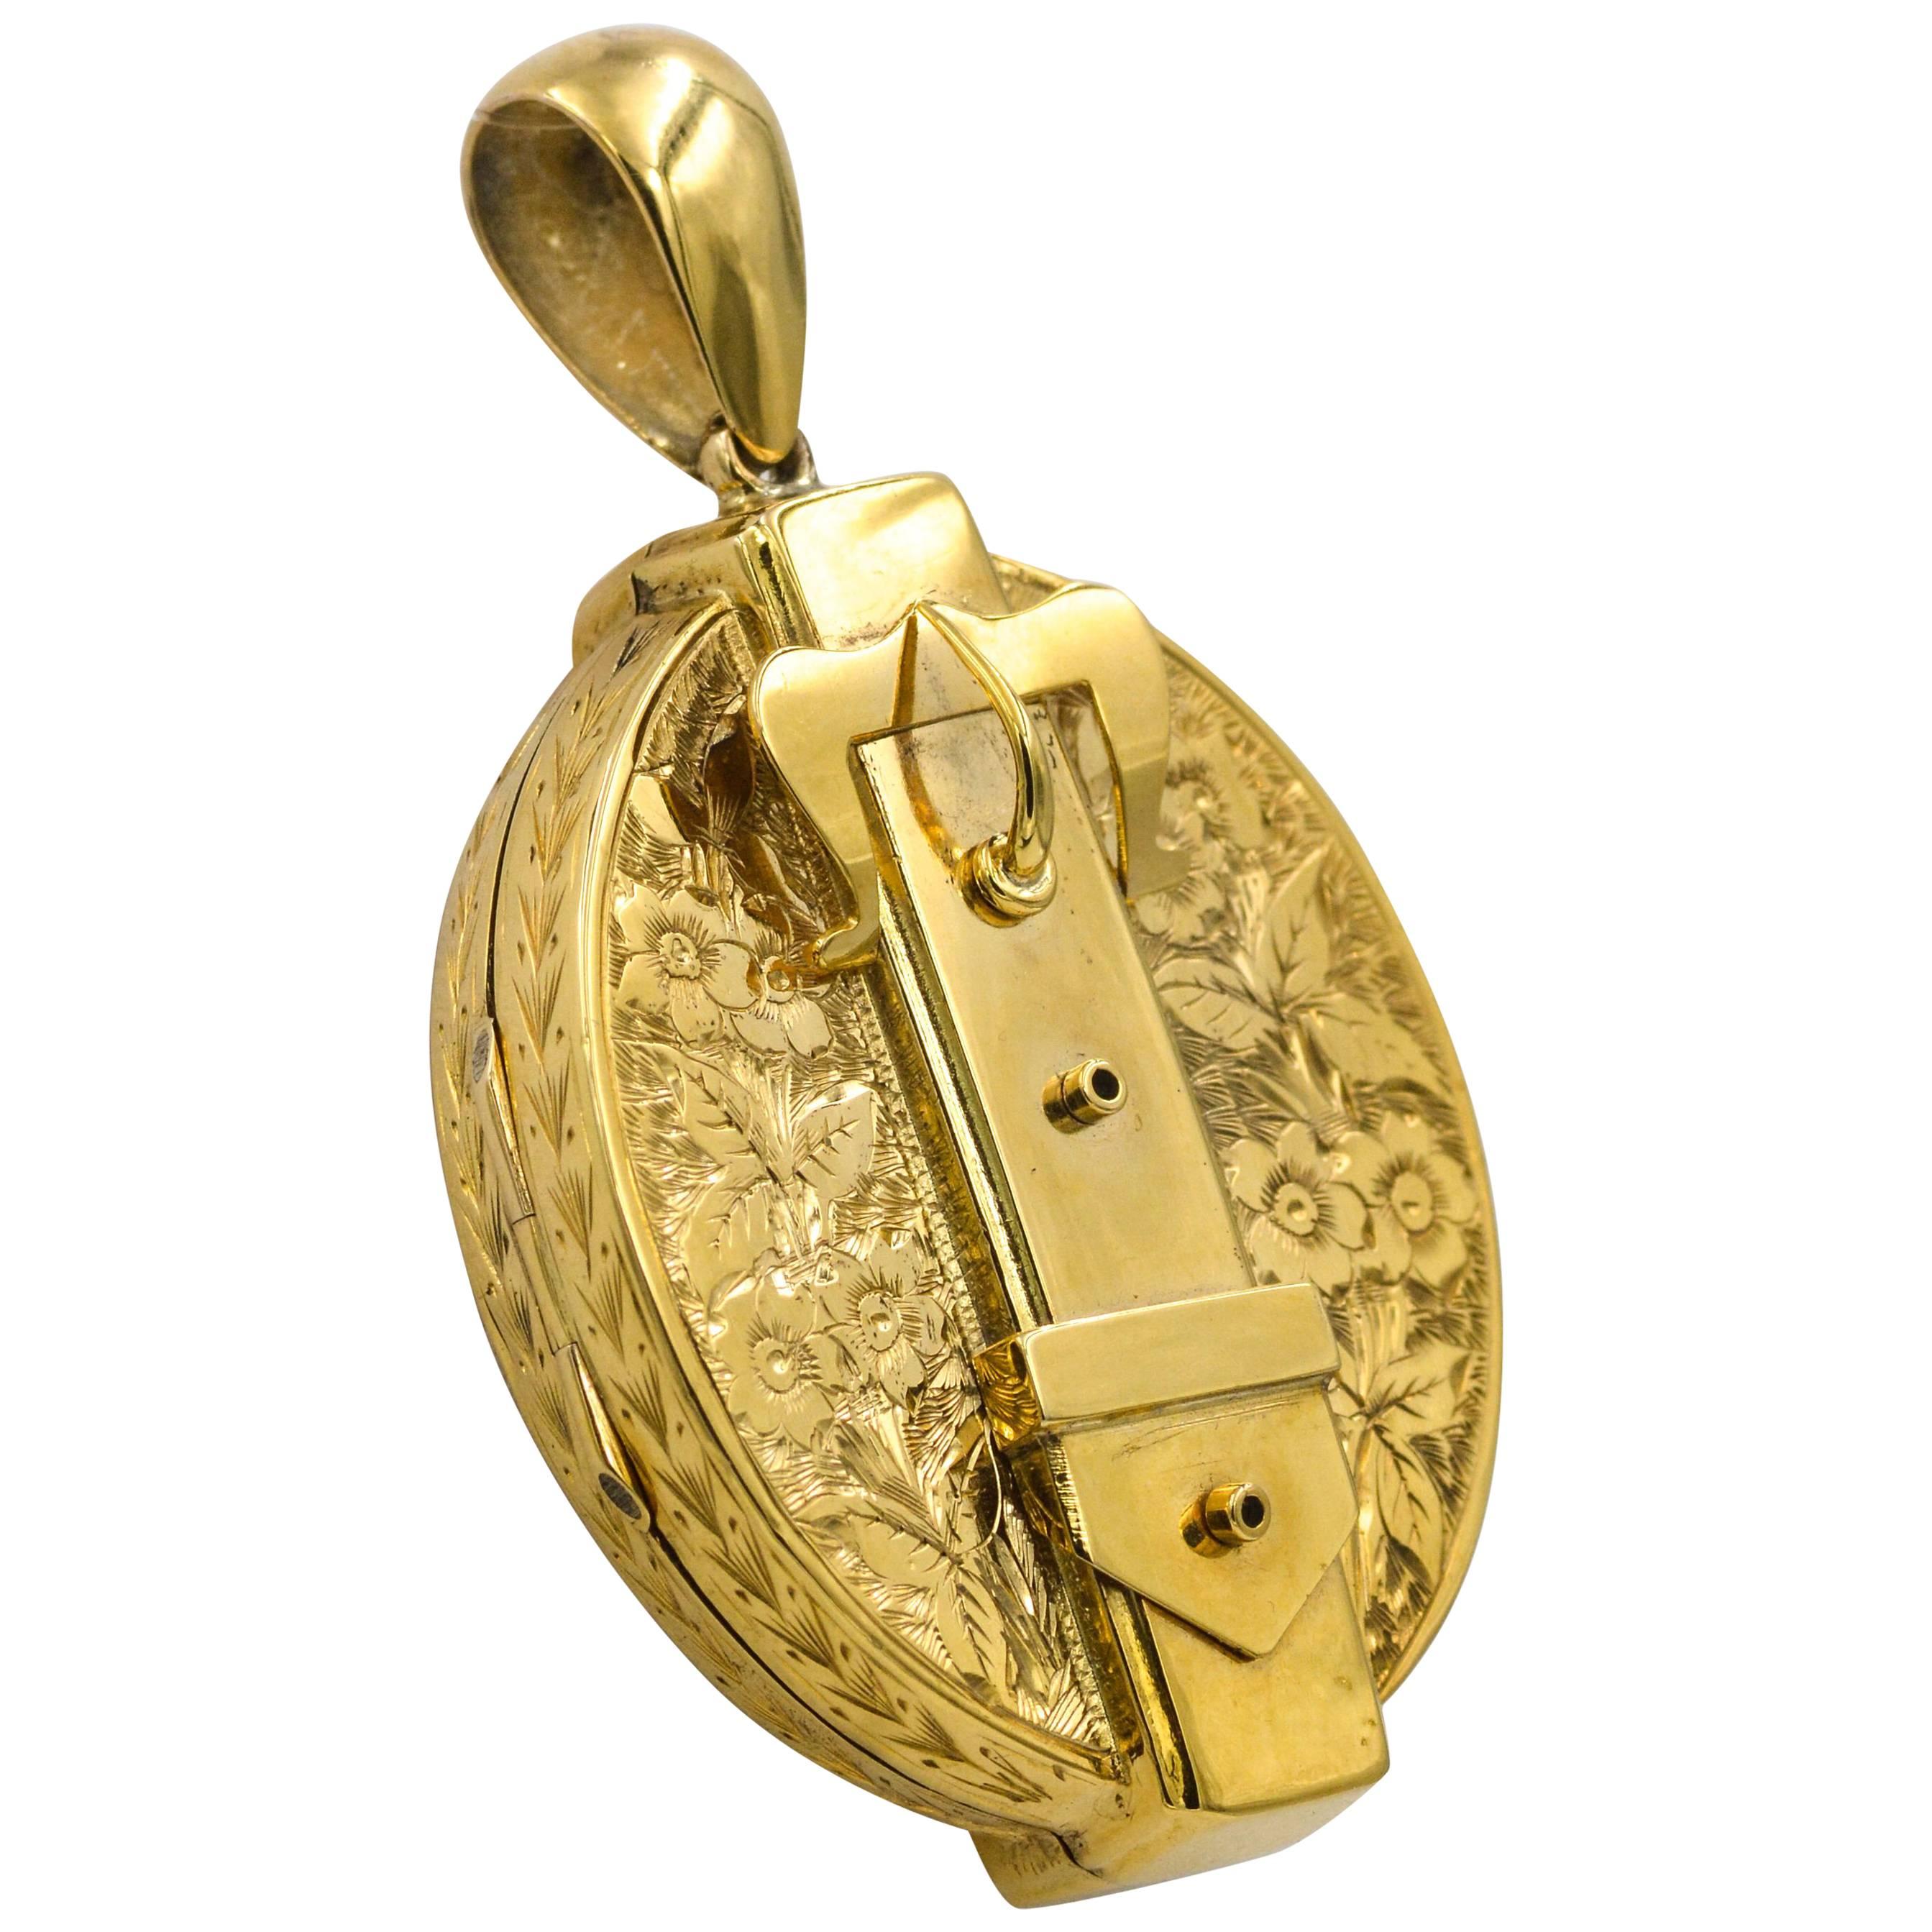 Victorian Hand Engraved Yellow Gold Locket